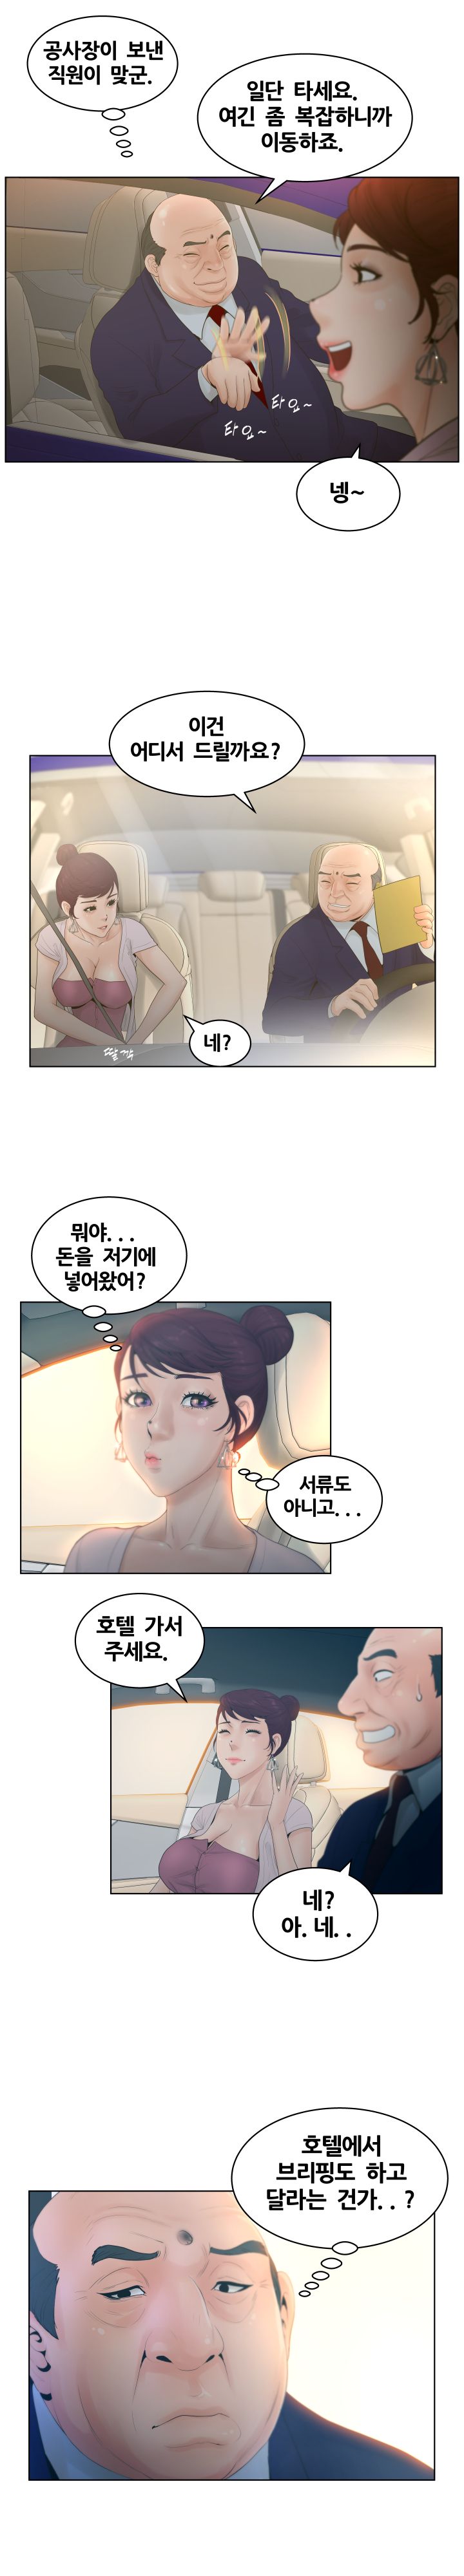 Share Girls Raw - Chapter 2 Page 5